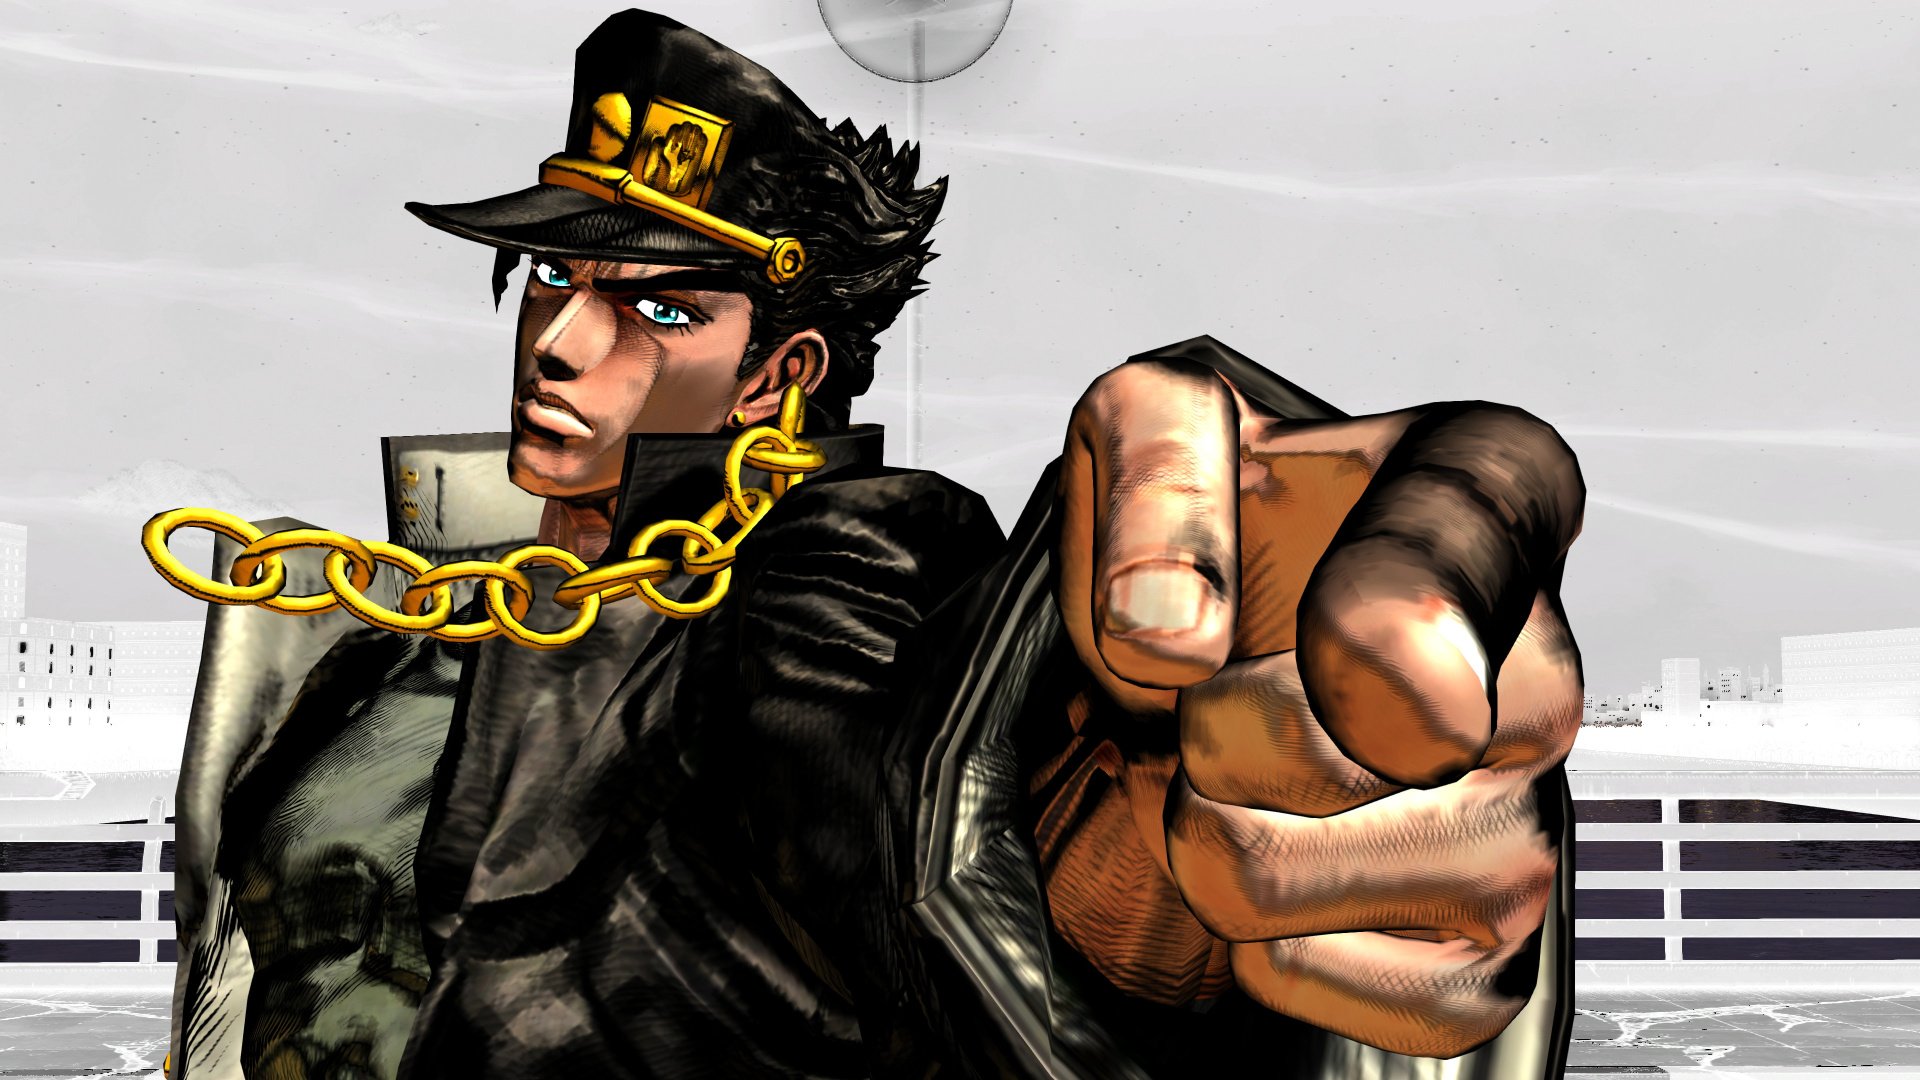 JoJo's Bizarre Adventure HD has been removed from Xbox Live and EU